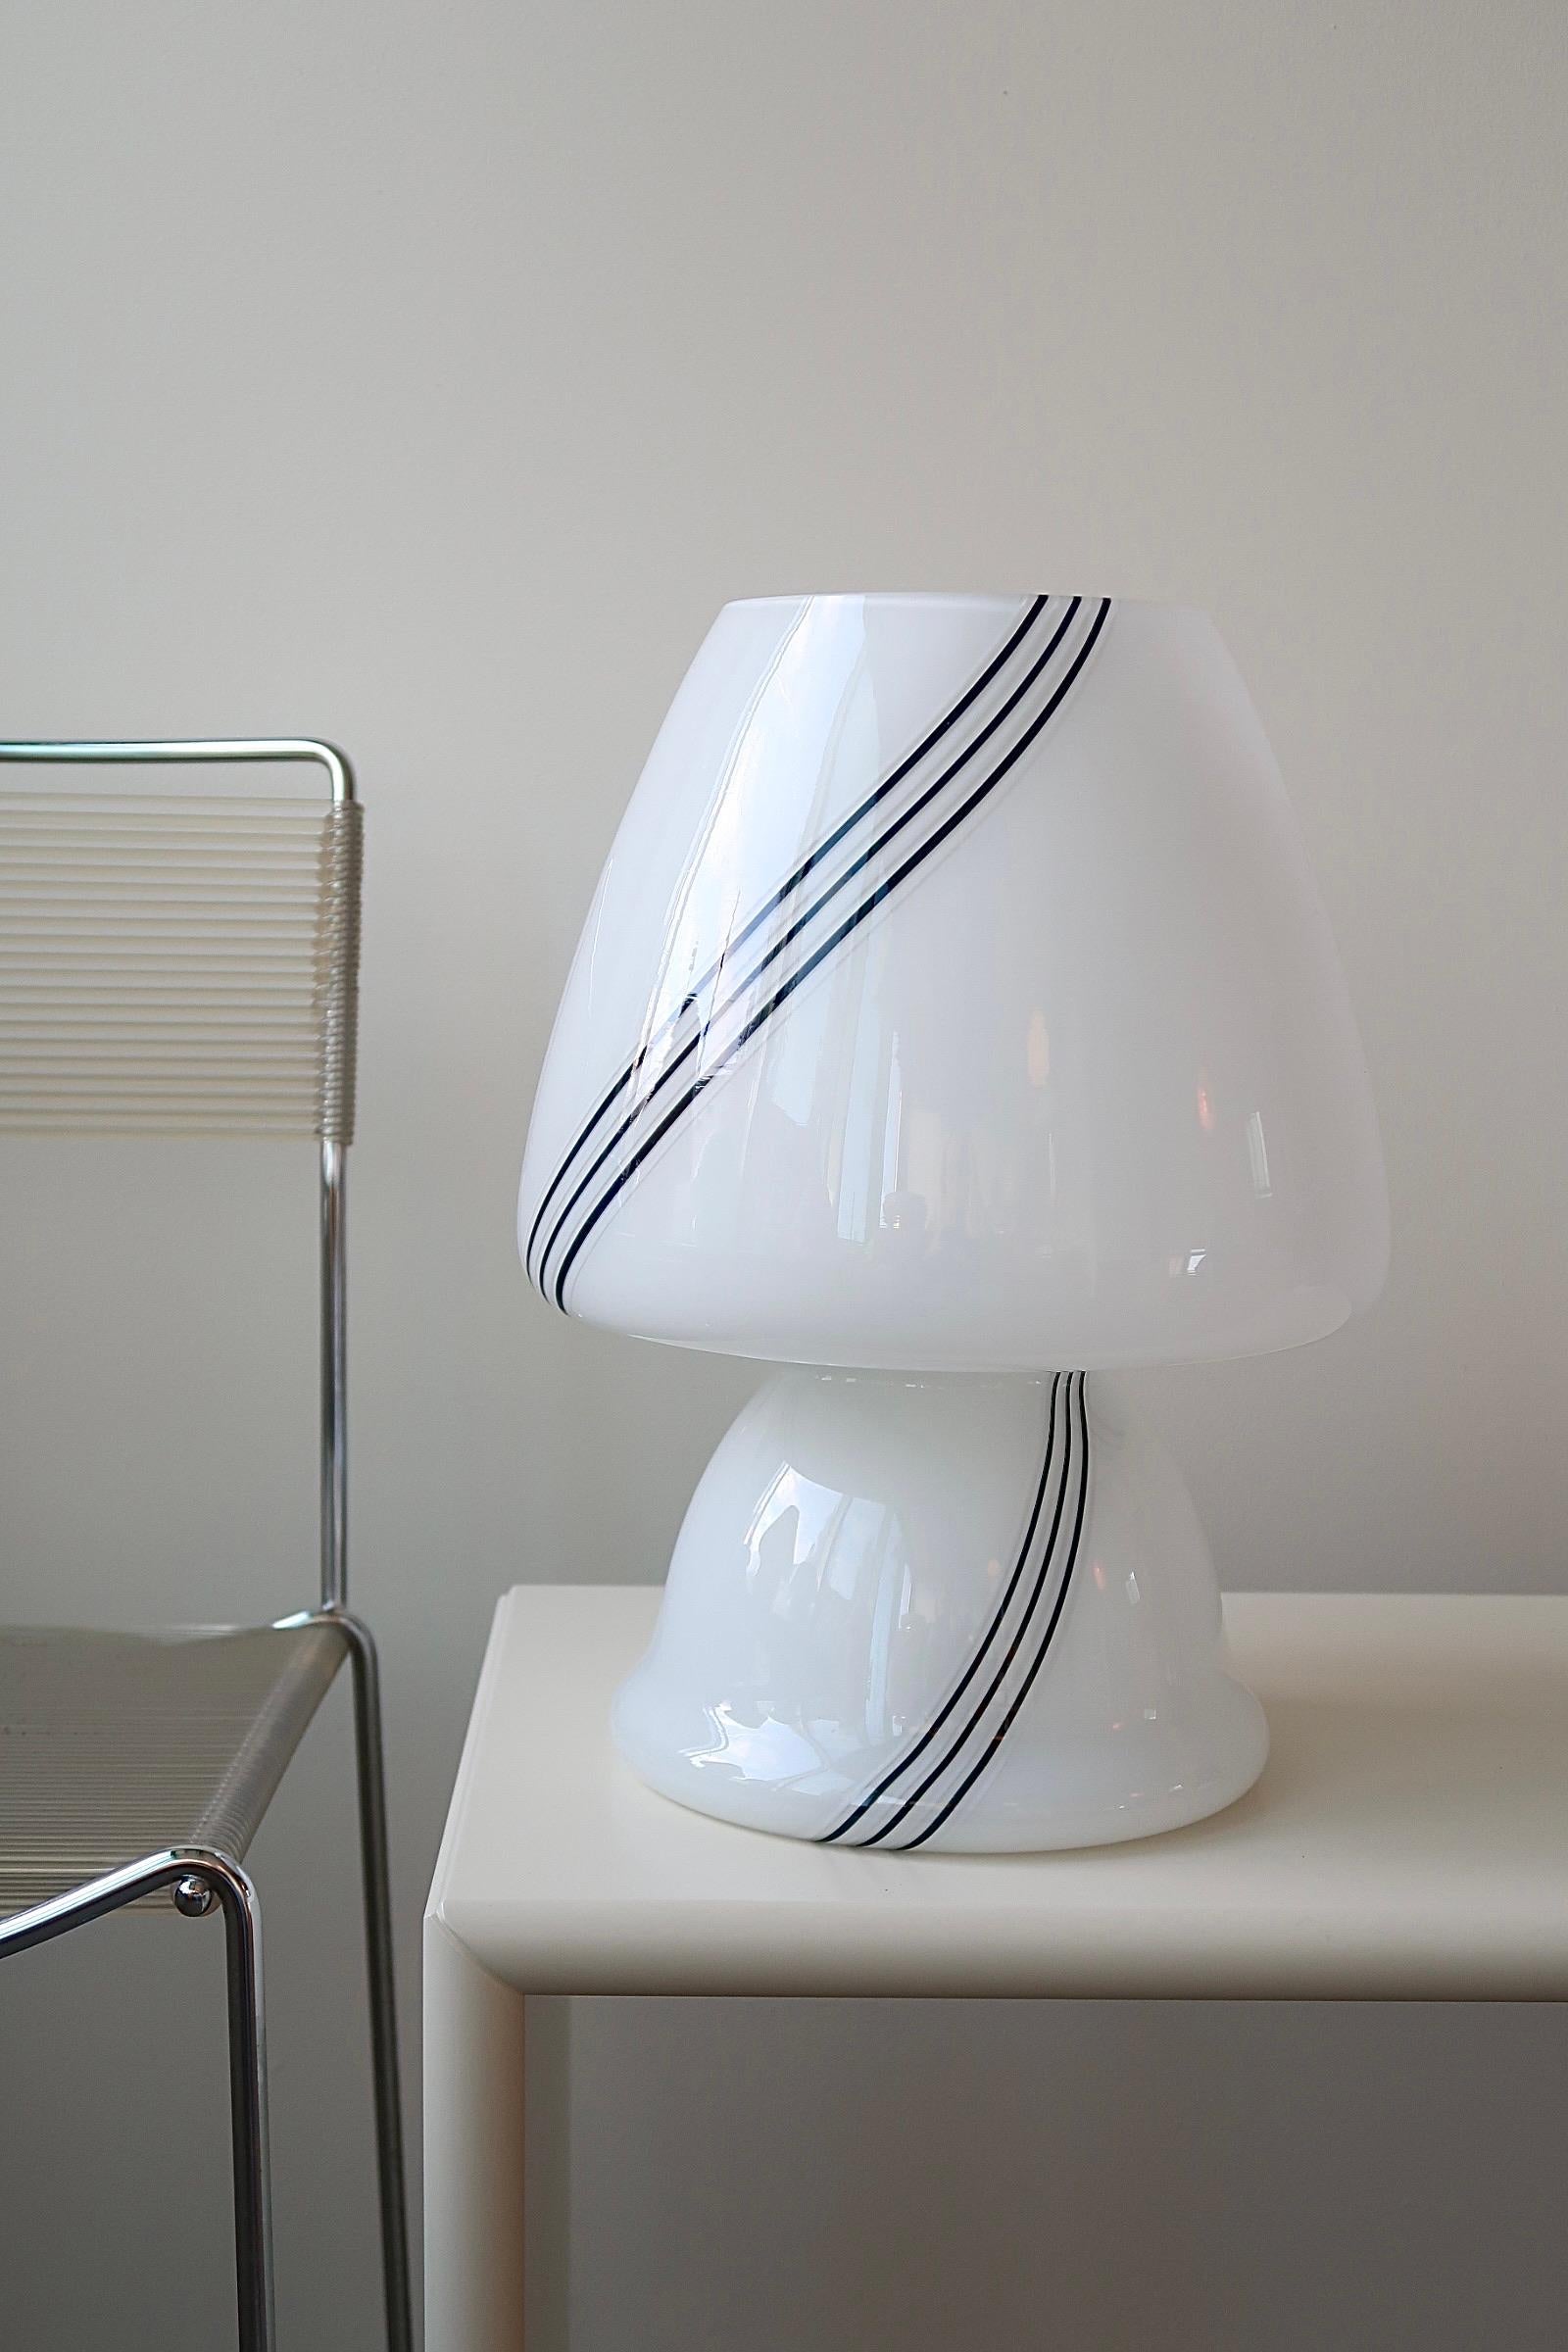 Vintage Murano mushroom table lamp in a large size. Mouth-blown in white glass with a dark swirl. Handmade in Italy, 1970s, and comes with new white cord.

H:39cm D:26cm.